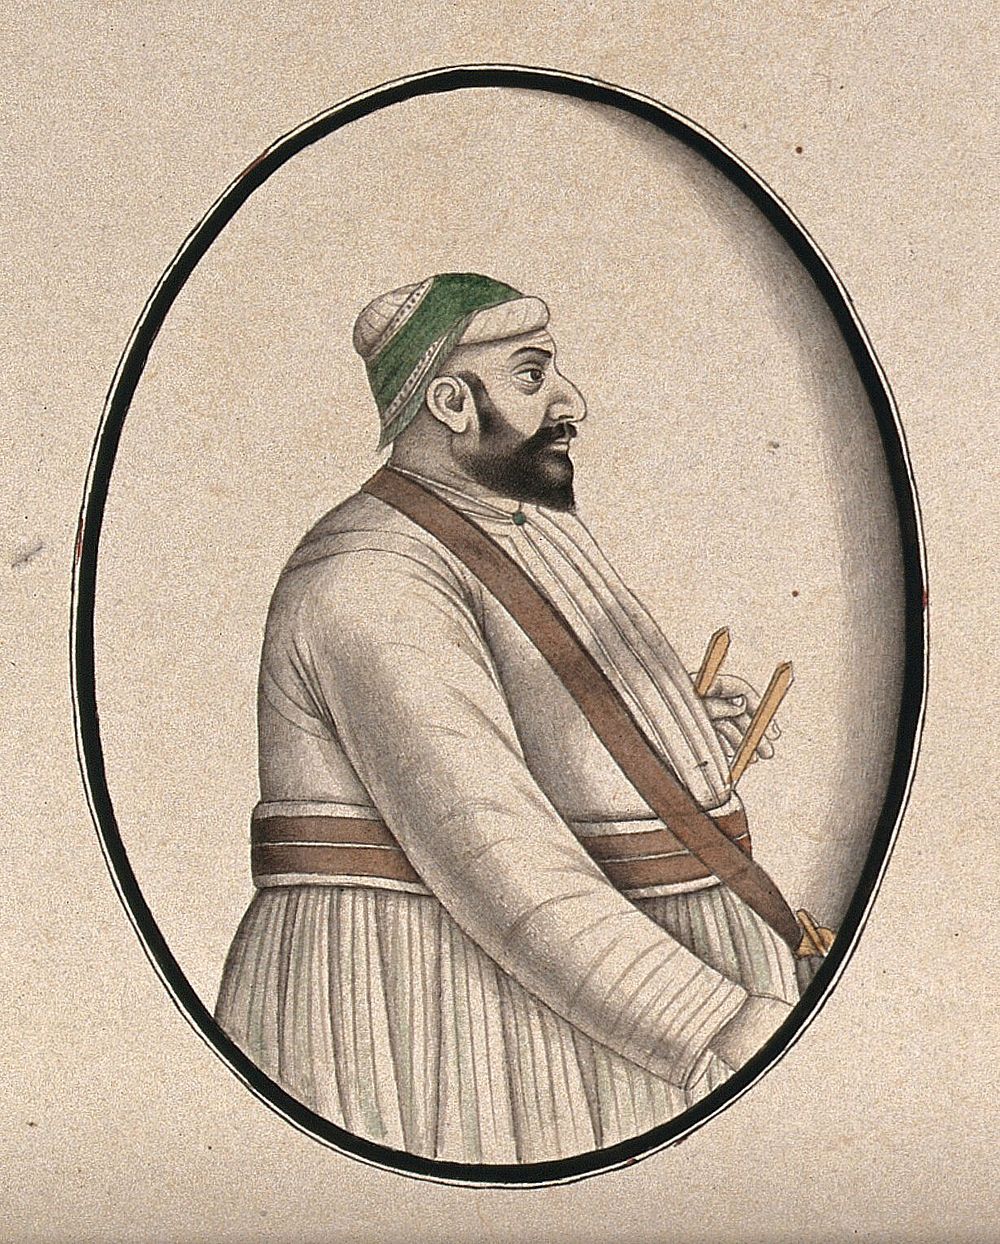 A portly Mughal courtier with a pointed beard. Watercolour drawing by an Indian artist.